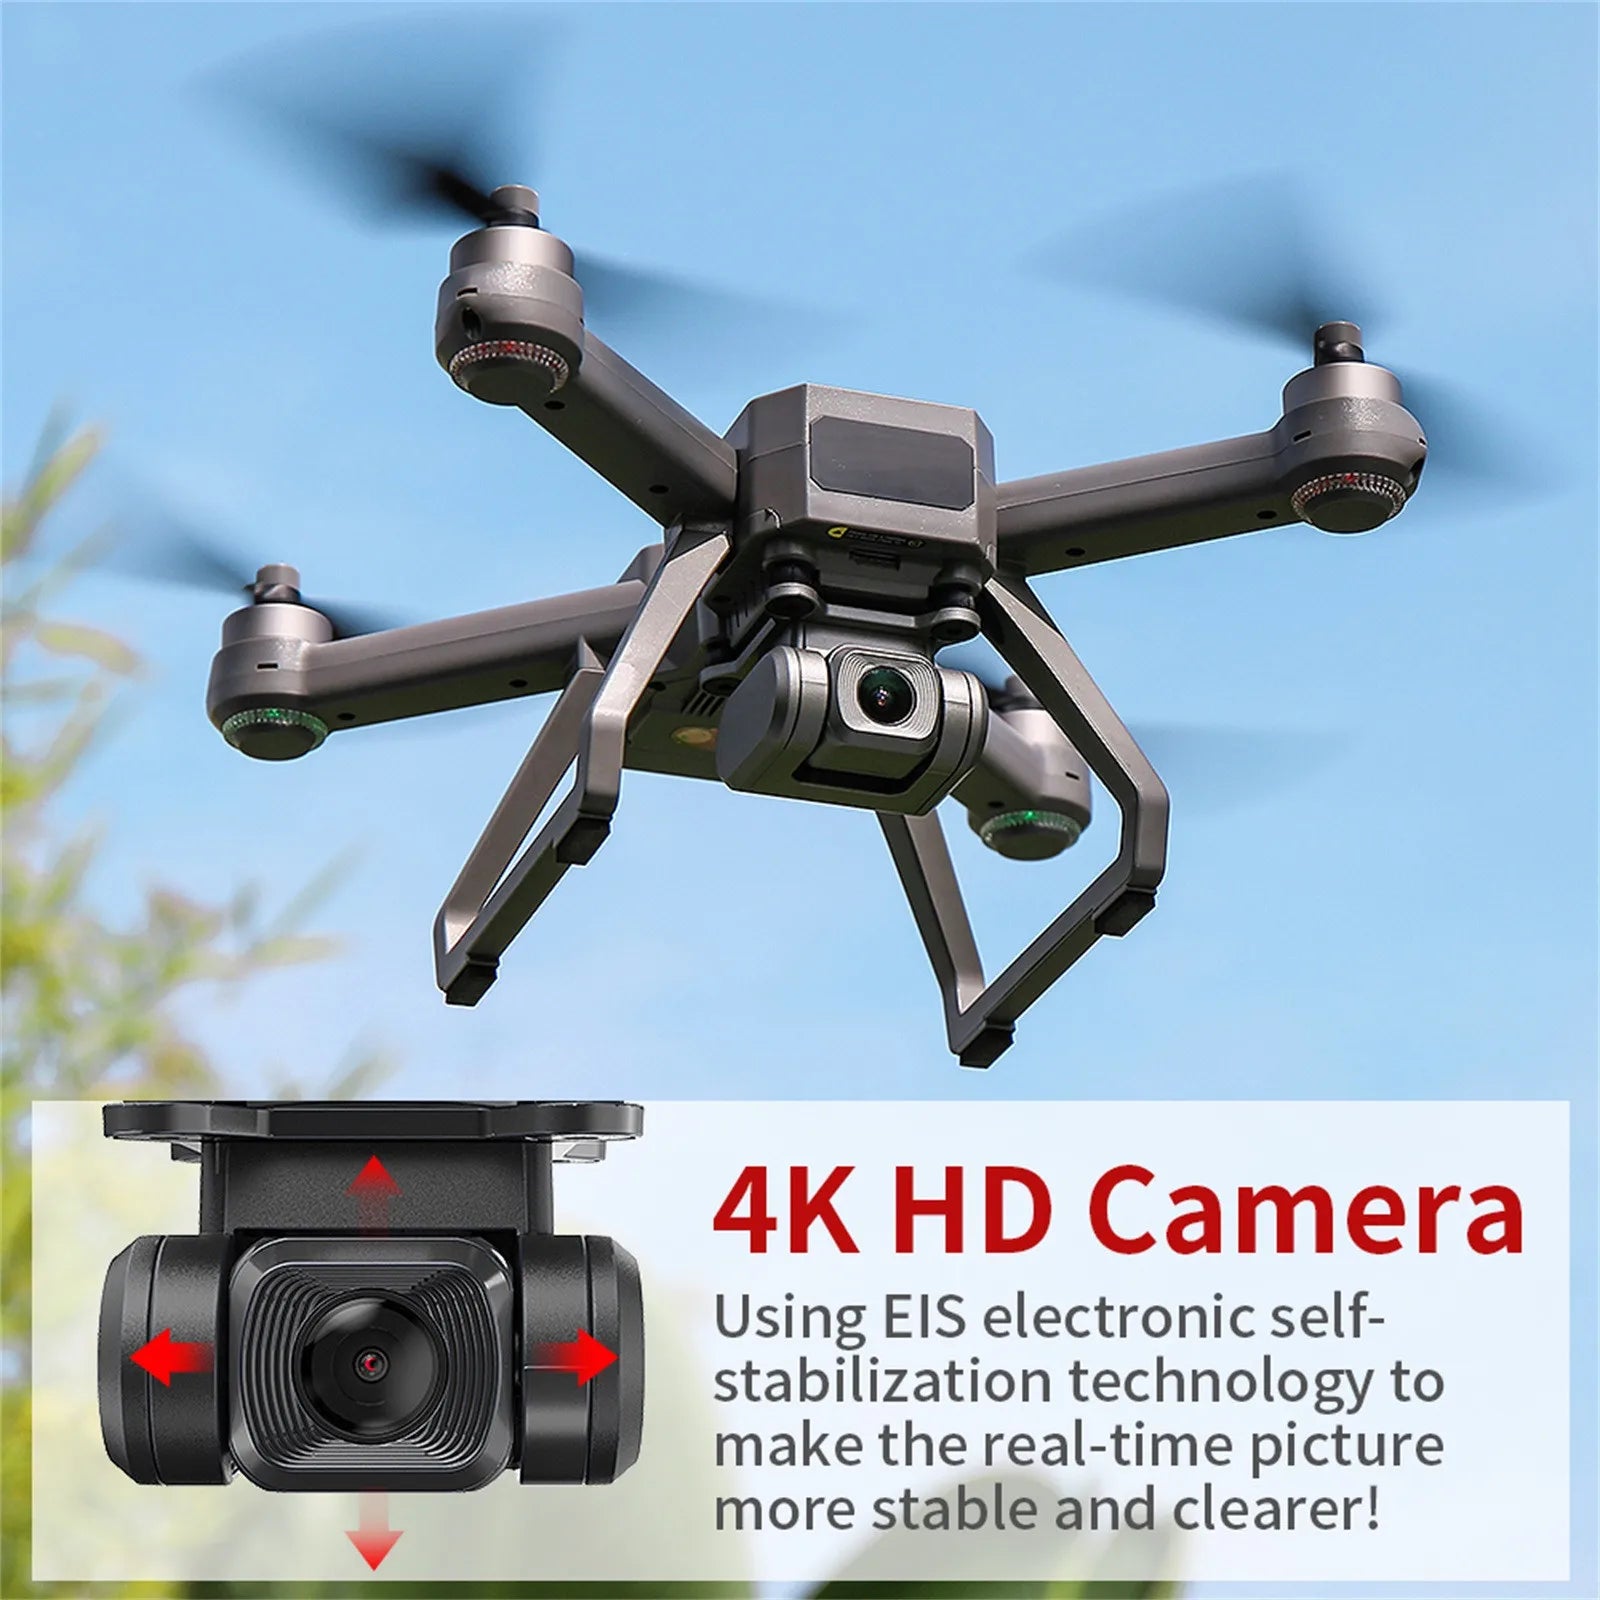 Mjx Bugs 20 Drone, 4K HD Camera Using EIS electronic self- stabilization technology to make the real-